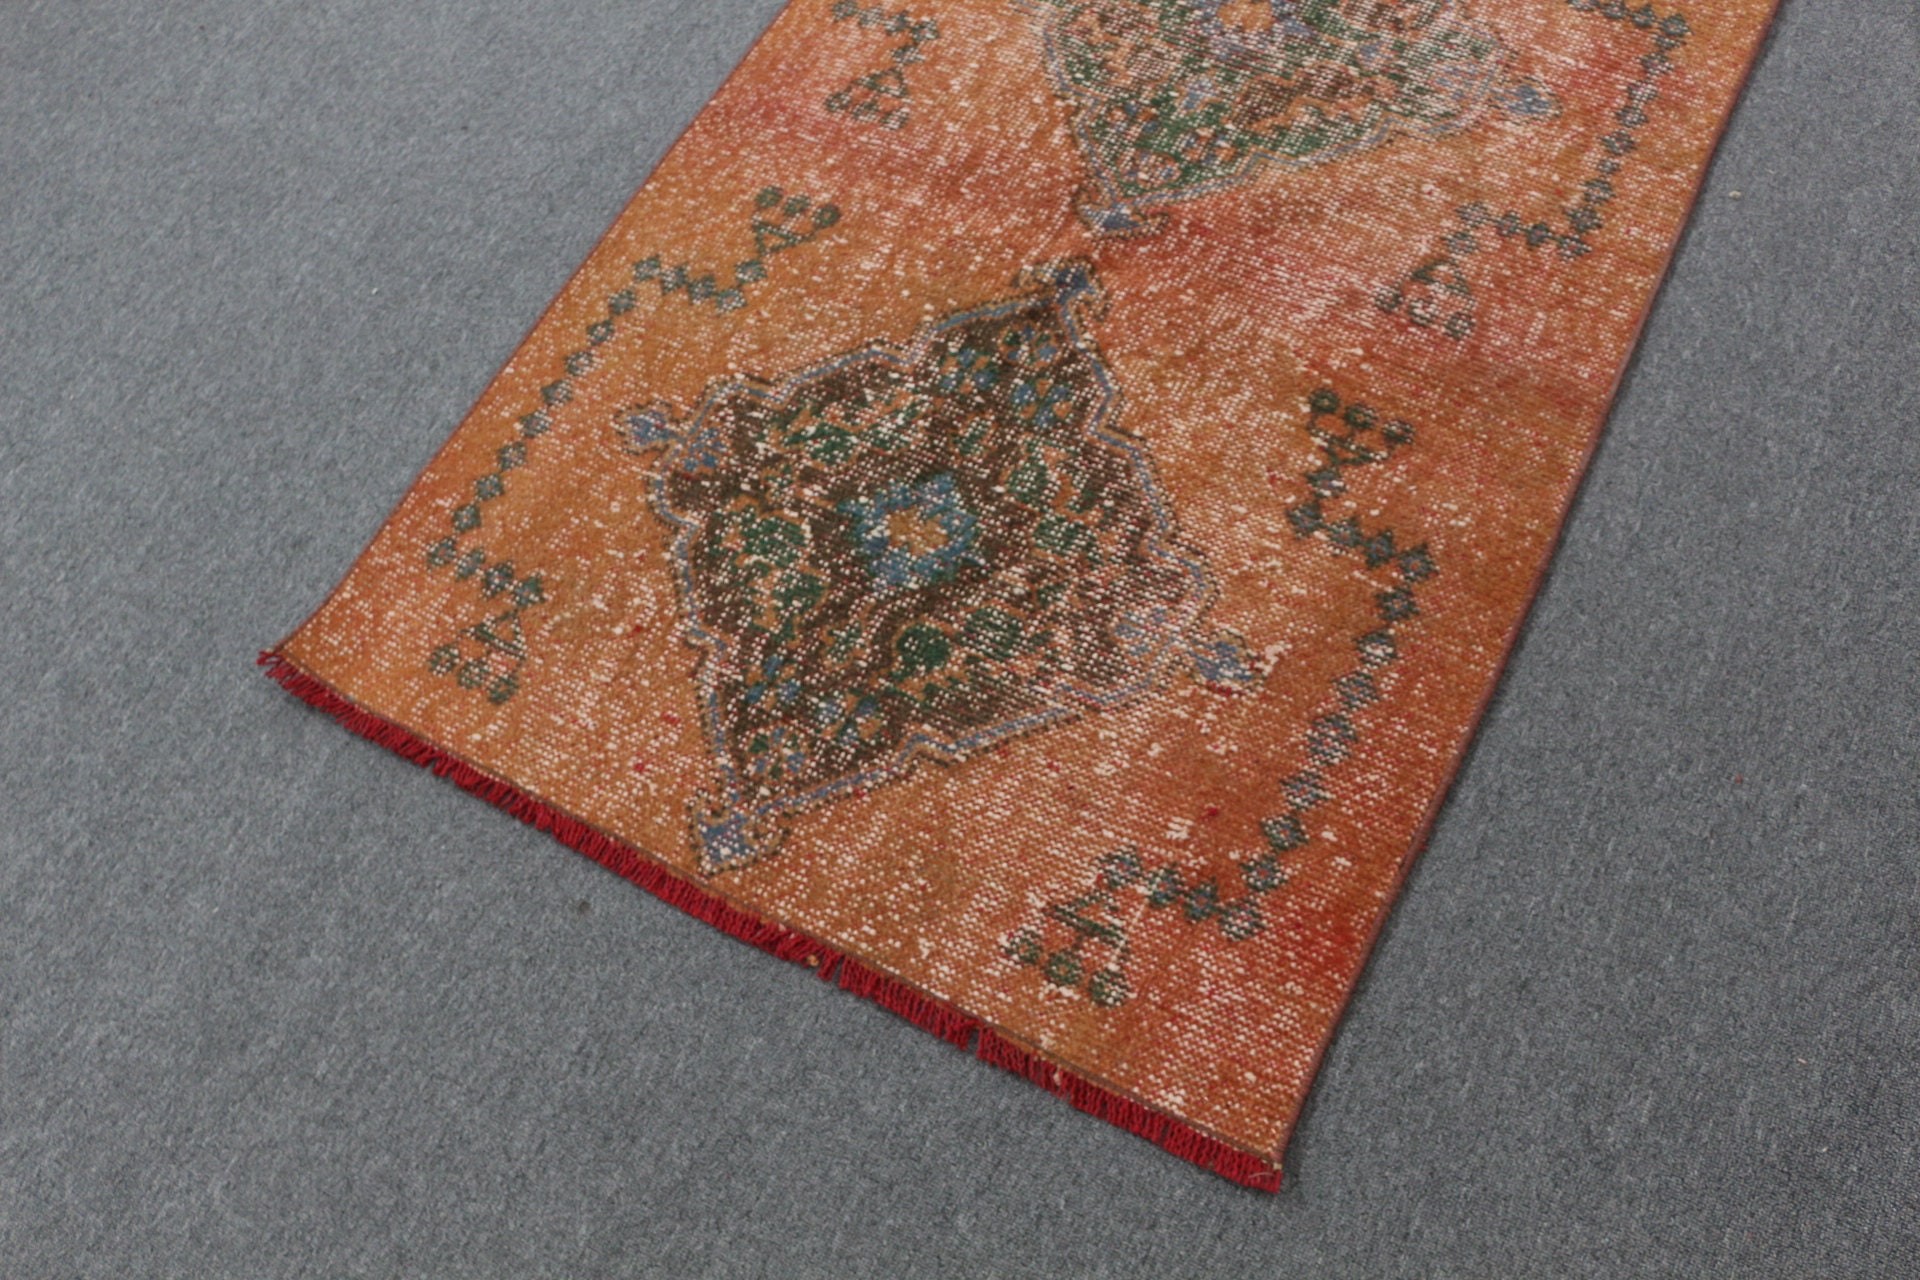 Bedroom Rug, Antique Rug, Door Mat Rug, Red Anatolian Rug, Hand Knotted Rug, 2.8x4.2 ft Small Rug, Vintage Rugs, Kitchen Rugs, Turkish Rugs